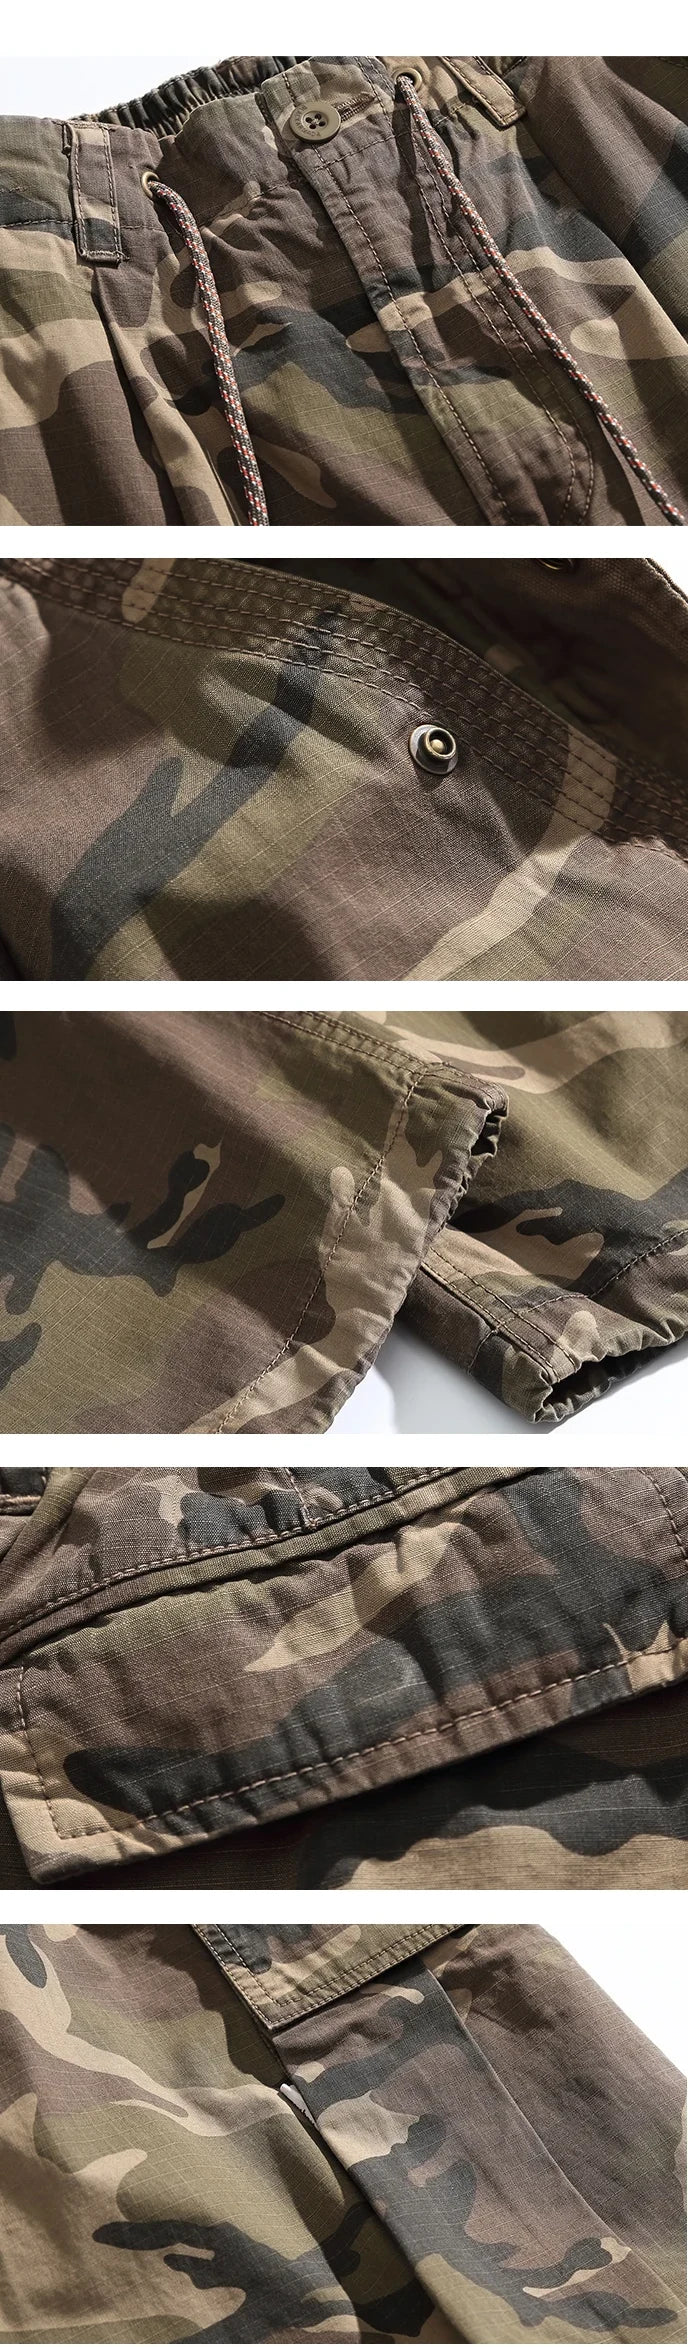 parts of the more details of the Camo streetwear pants "Fujioka"